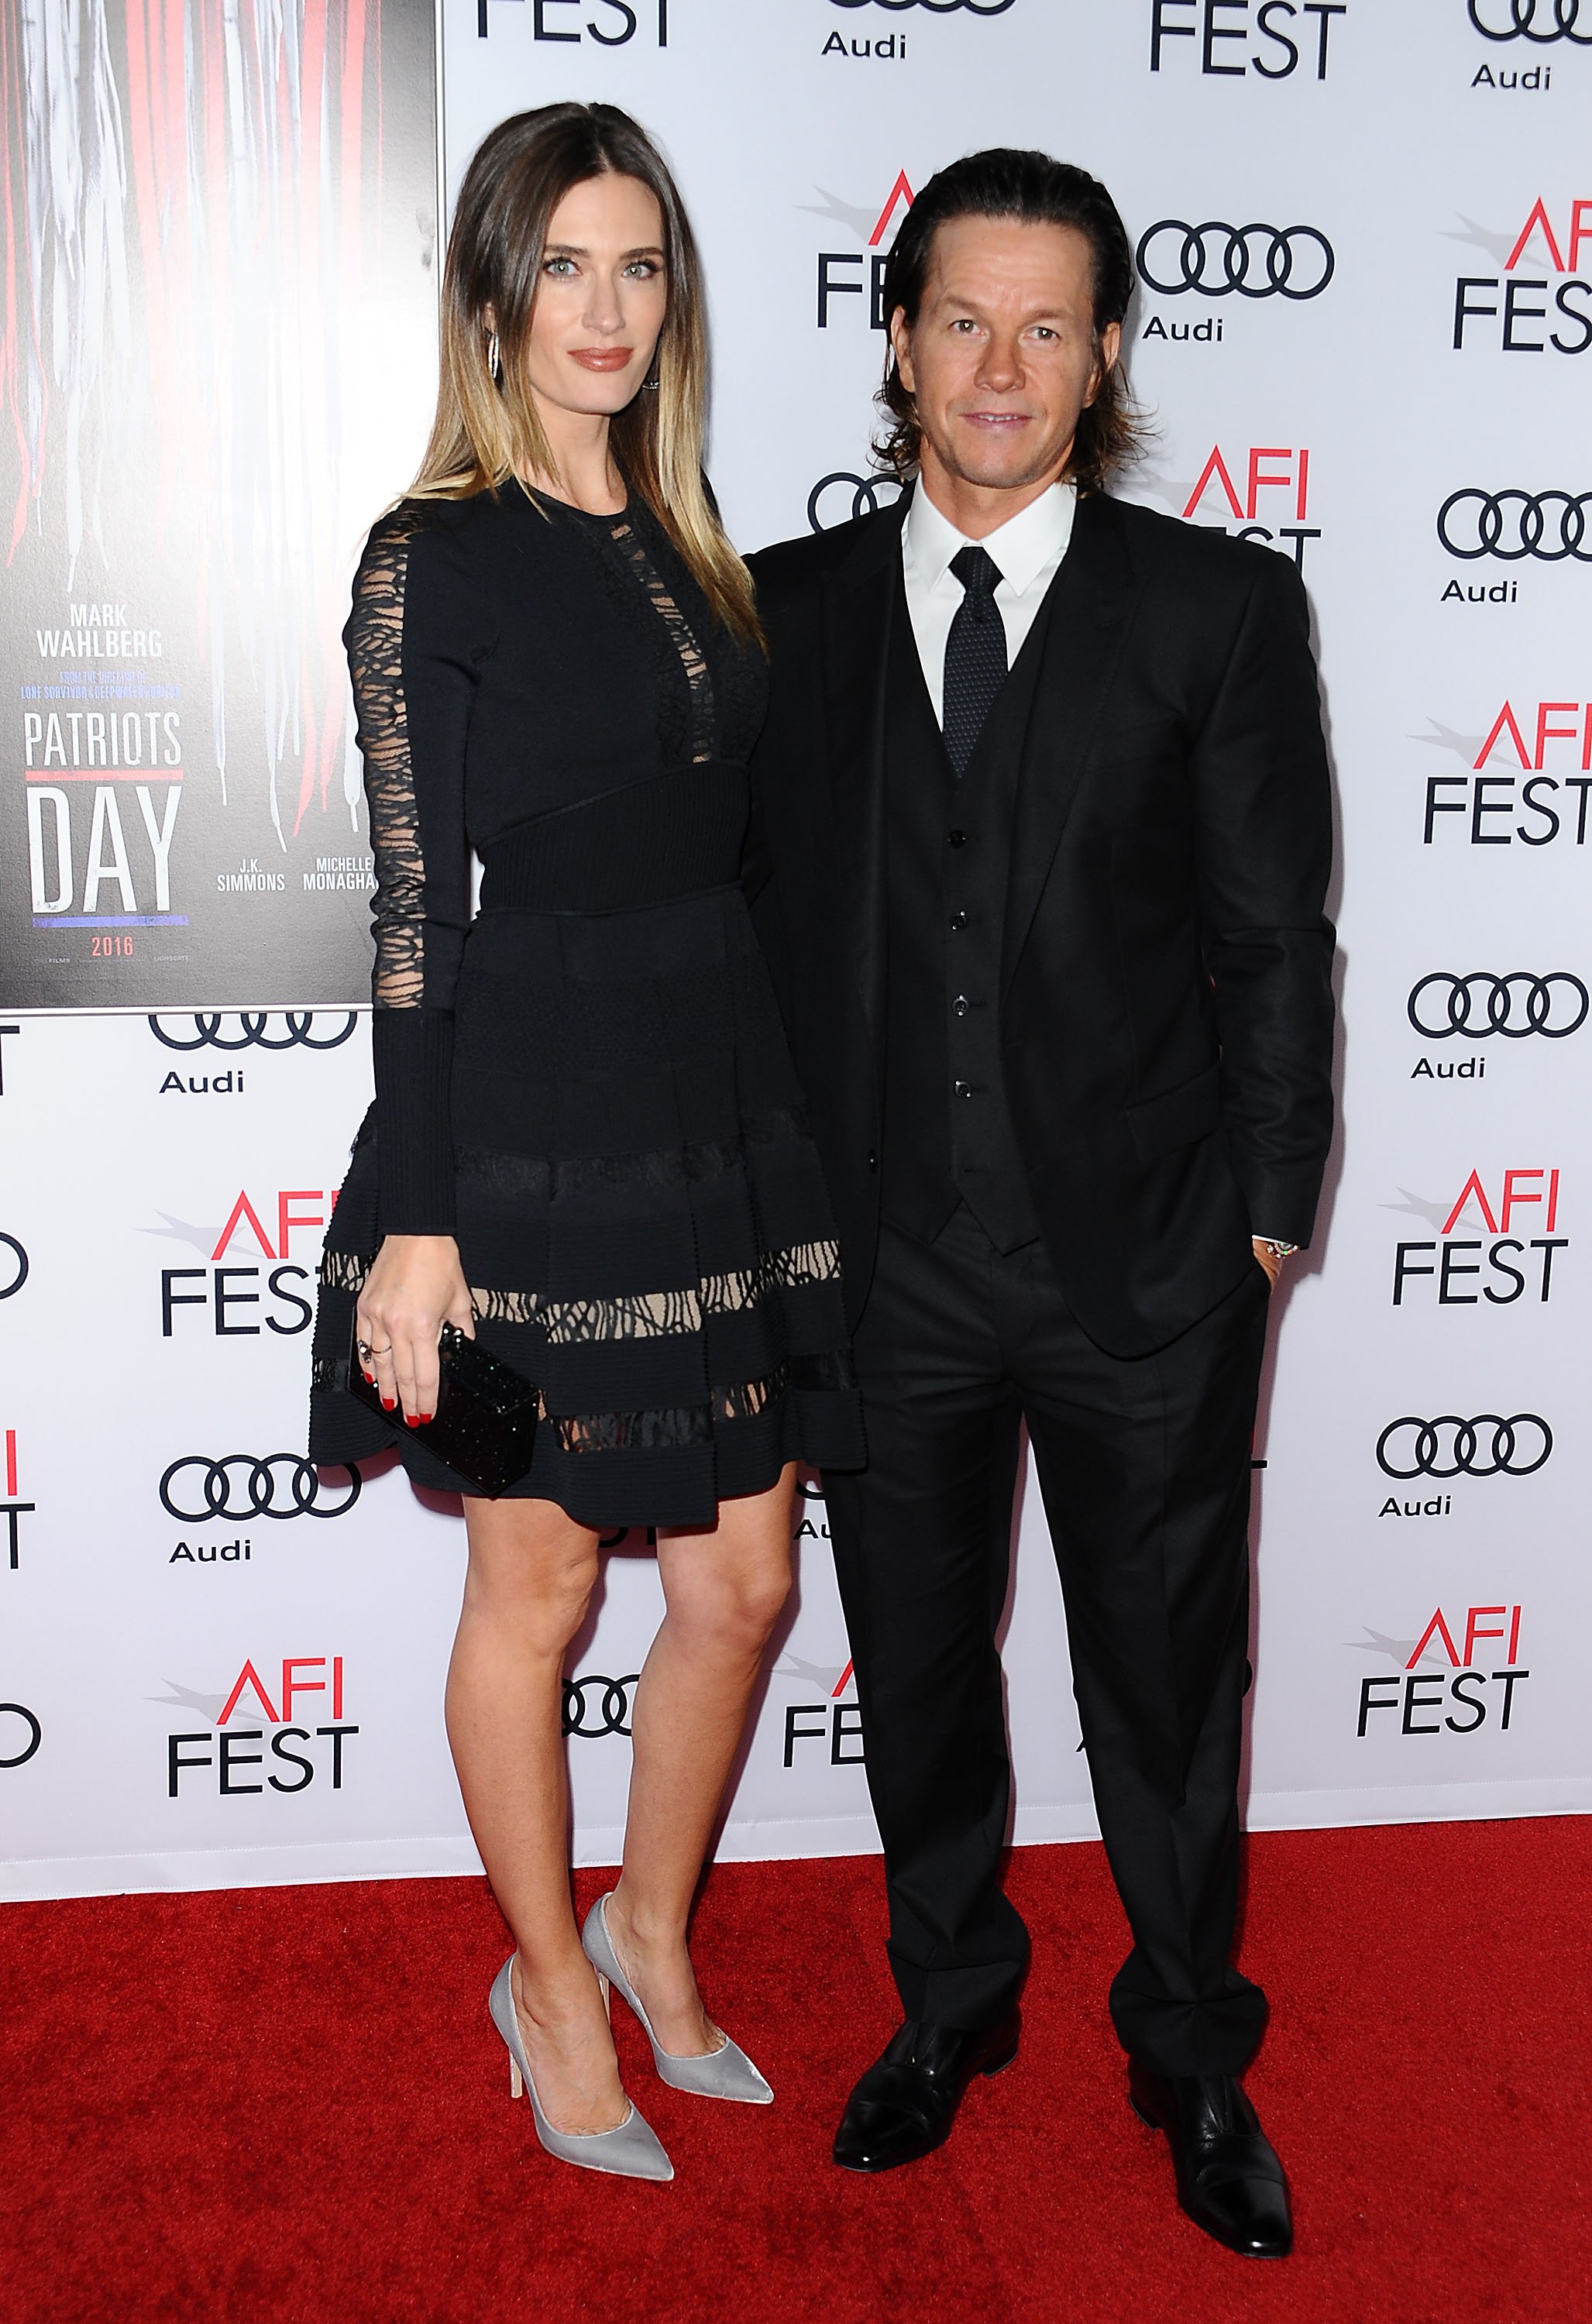 Mark Wahlberg and wife Rhea Durham attend the closing night gala screening of "Patriots Day" at the 2016 AFI Fest at TCL Chinese Theatre on November 17, 2016 in Hollywood, California. | Source: Getty Images